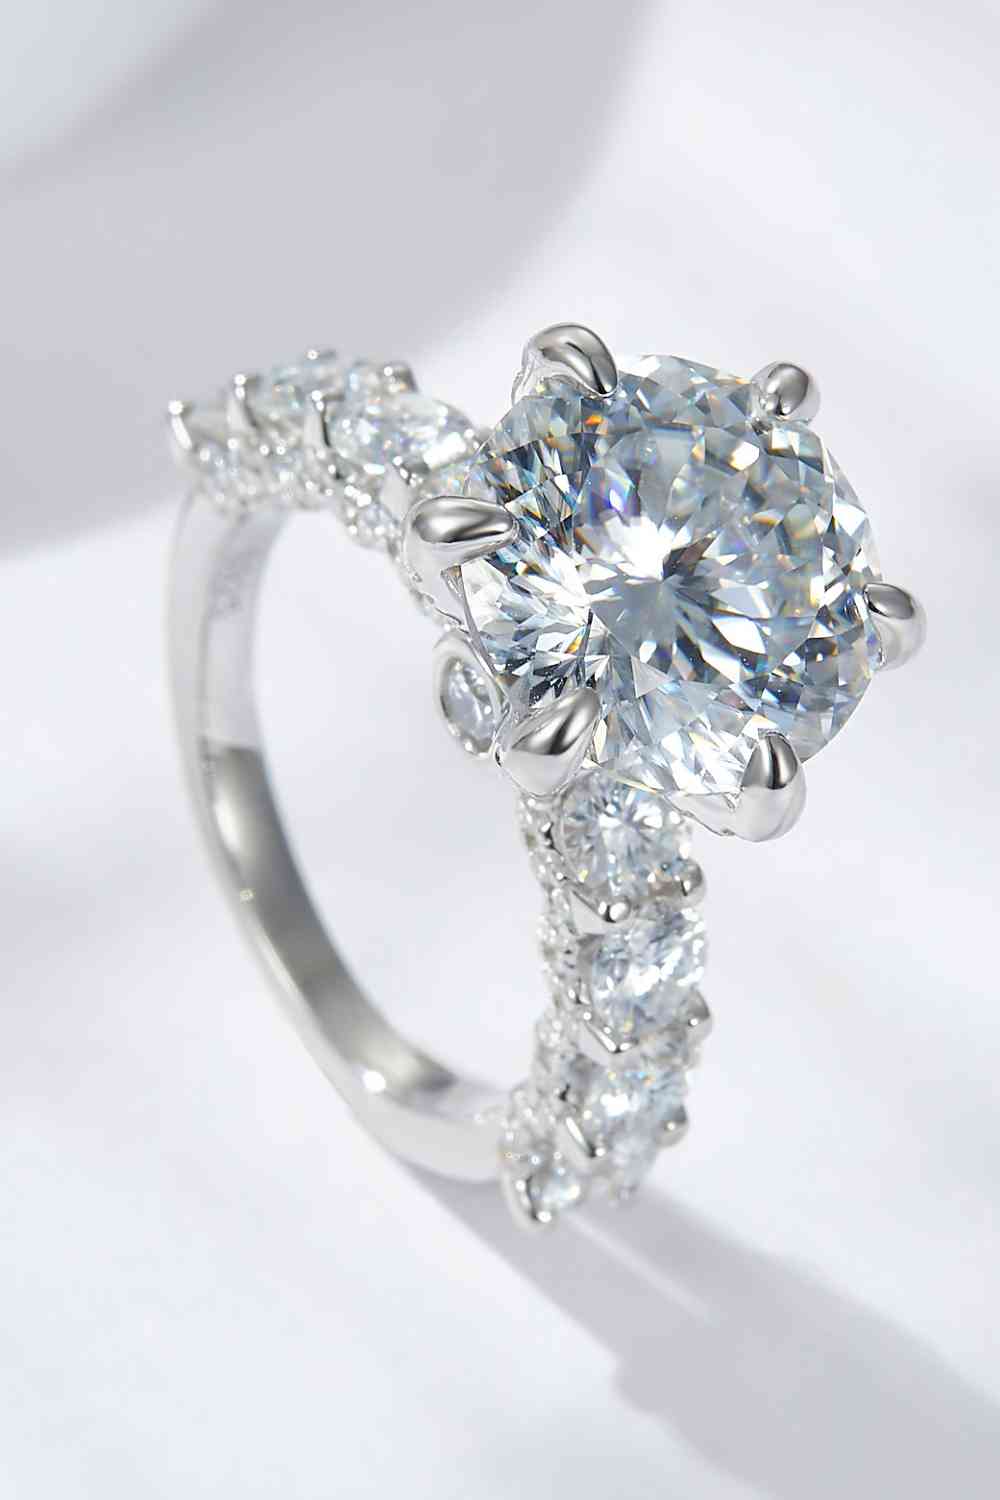 a diamond ring with three stones on top of it